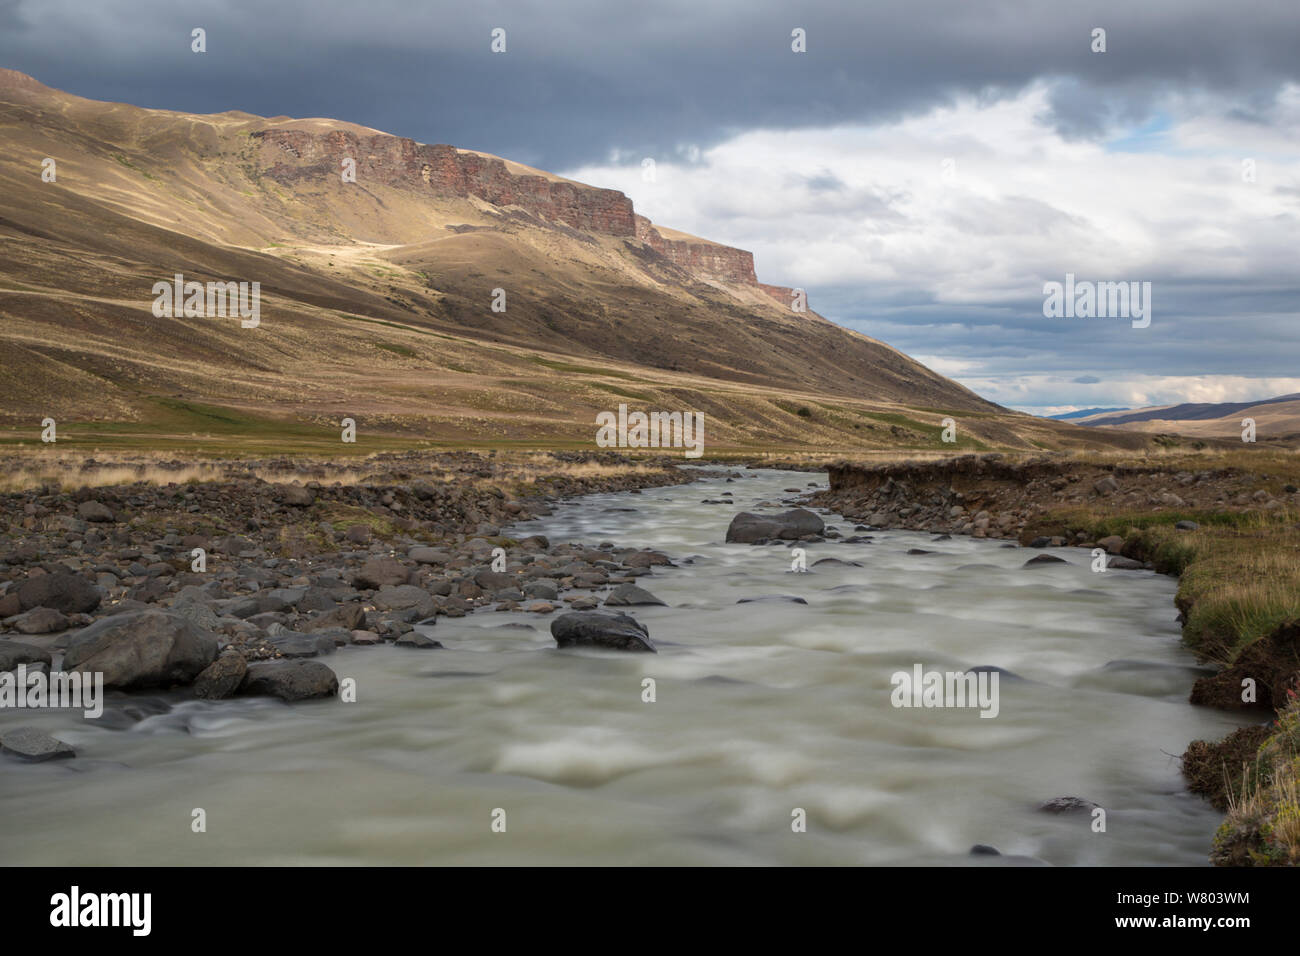 Landscape with Baguales River, Sierra Baguales, Patagonia, Chile, March 2015. Stock Photo